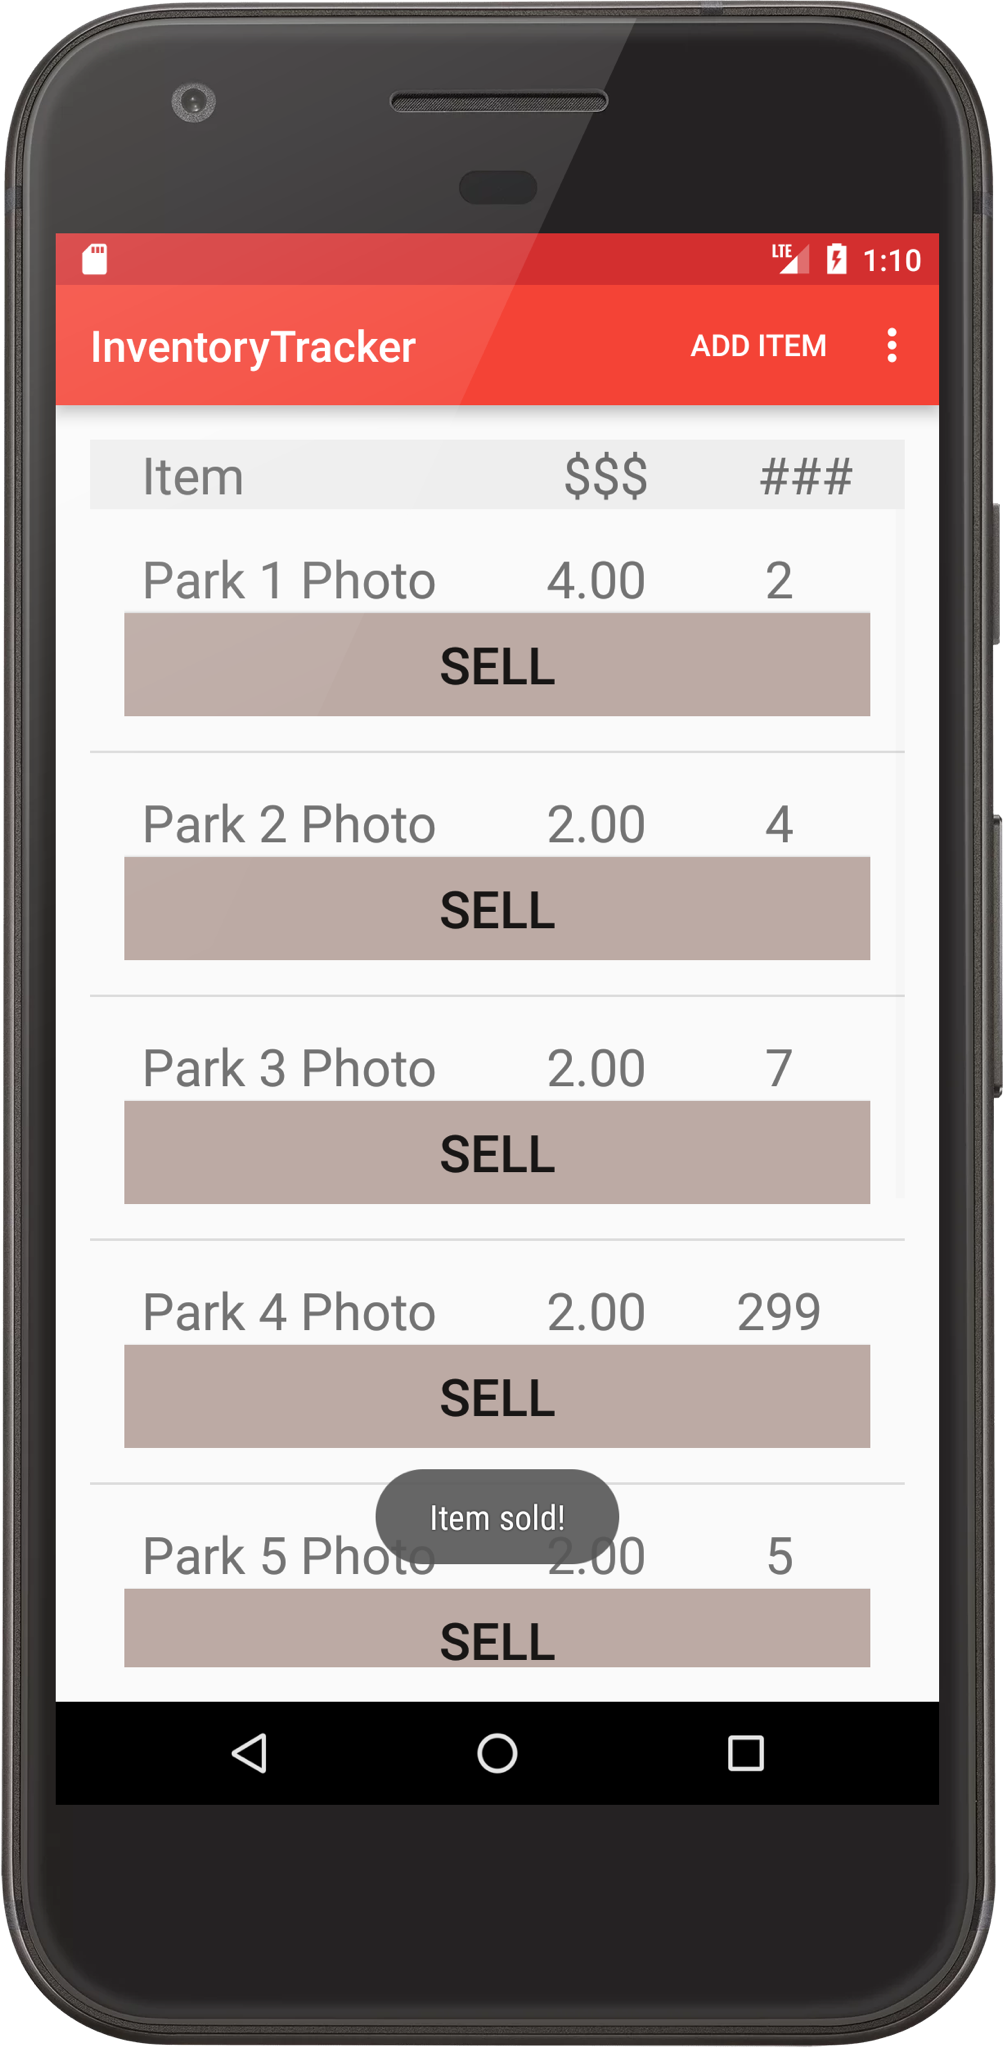 inventory tracker android app screenshot